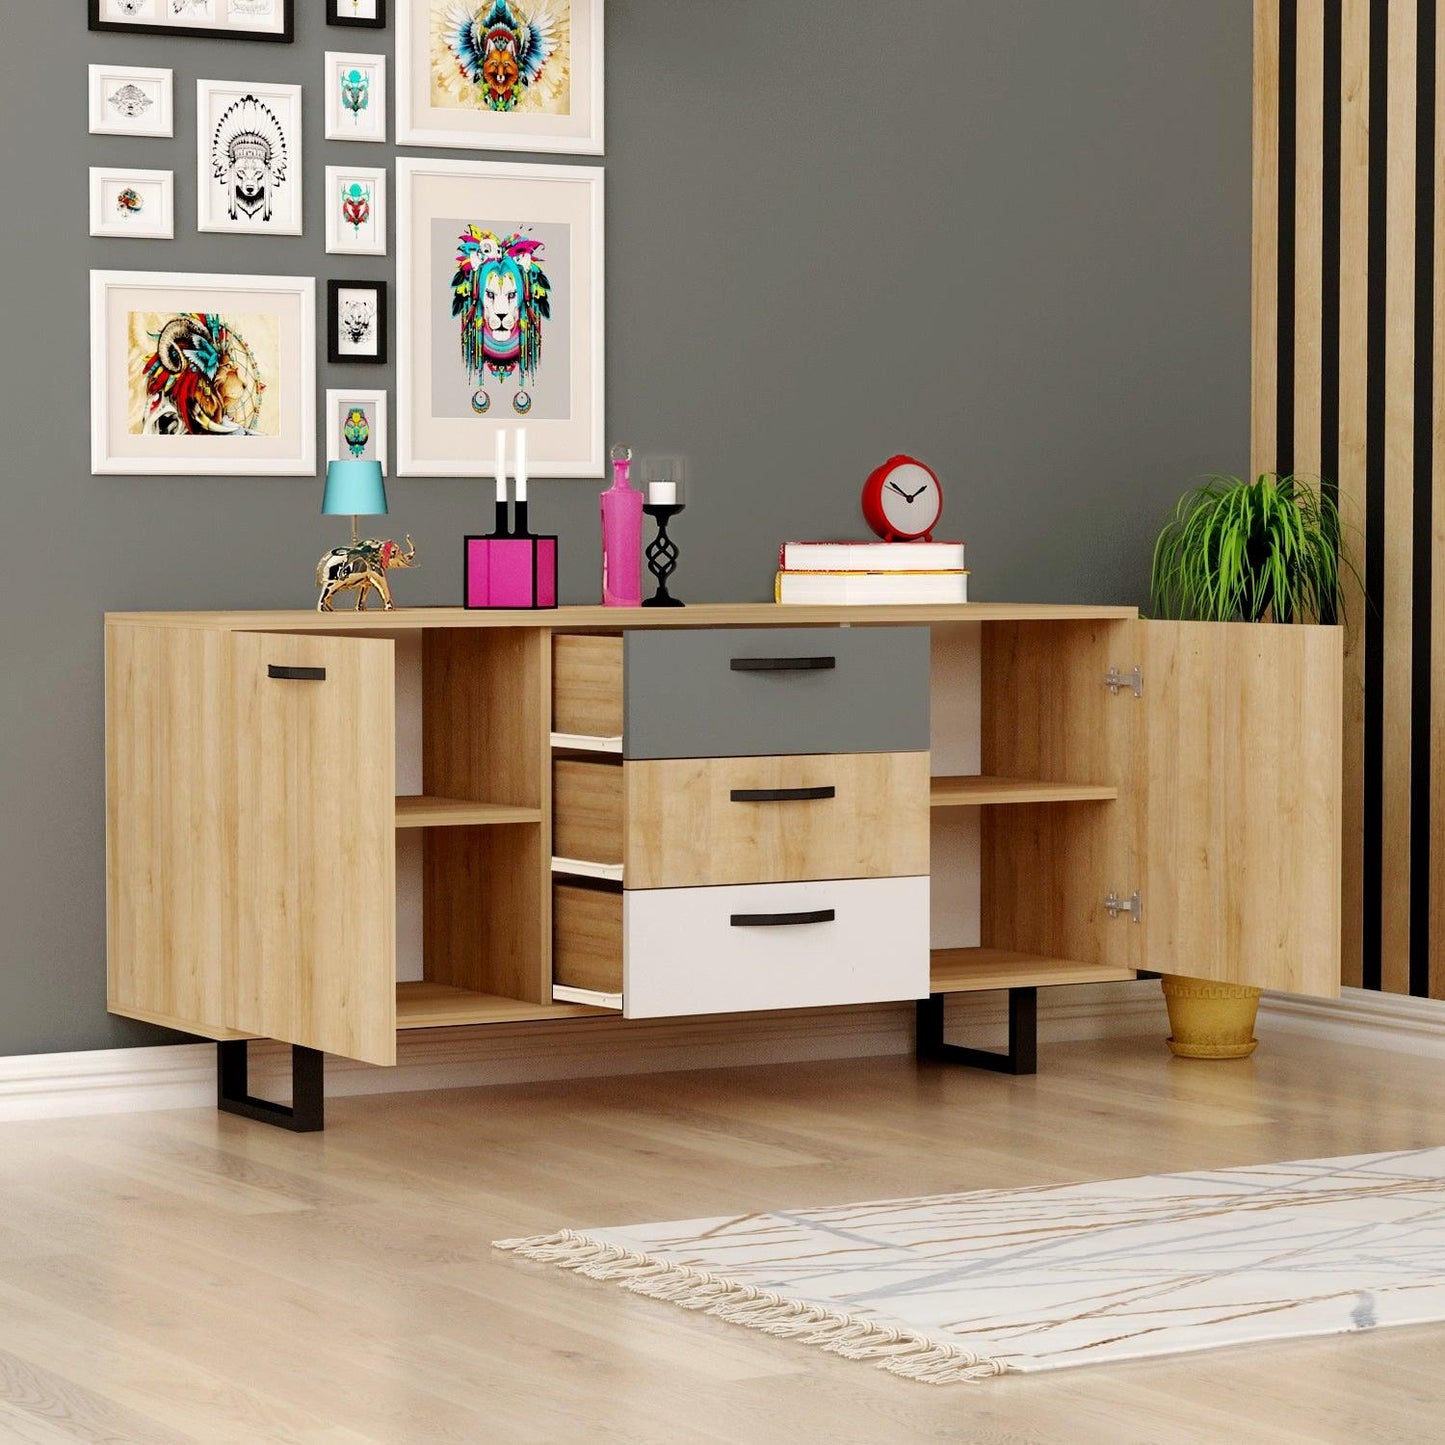 Agustine Sideboard with Cabinets and Drawers - Destina Home